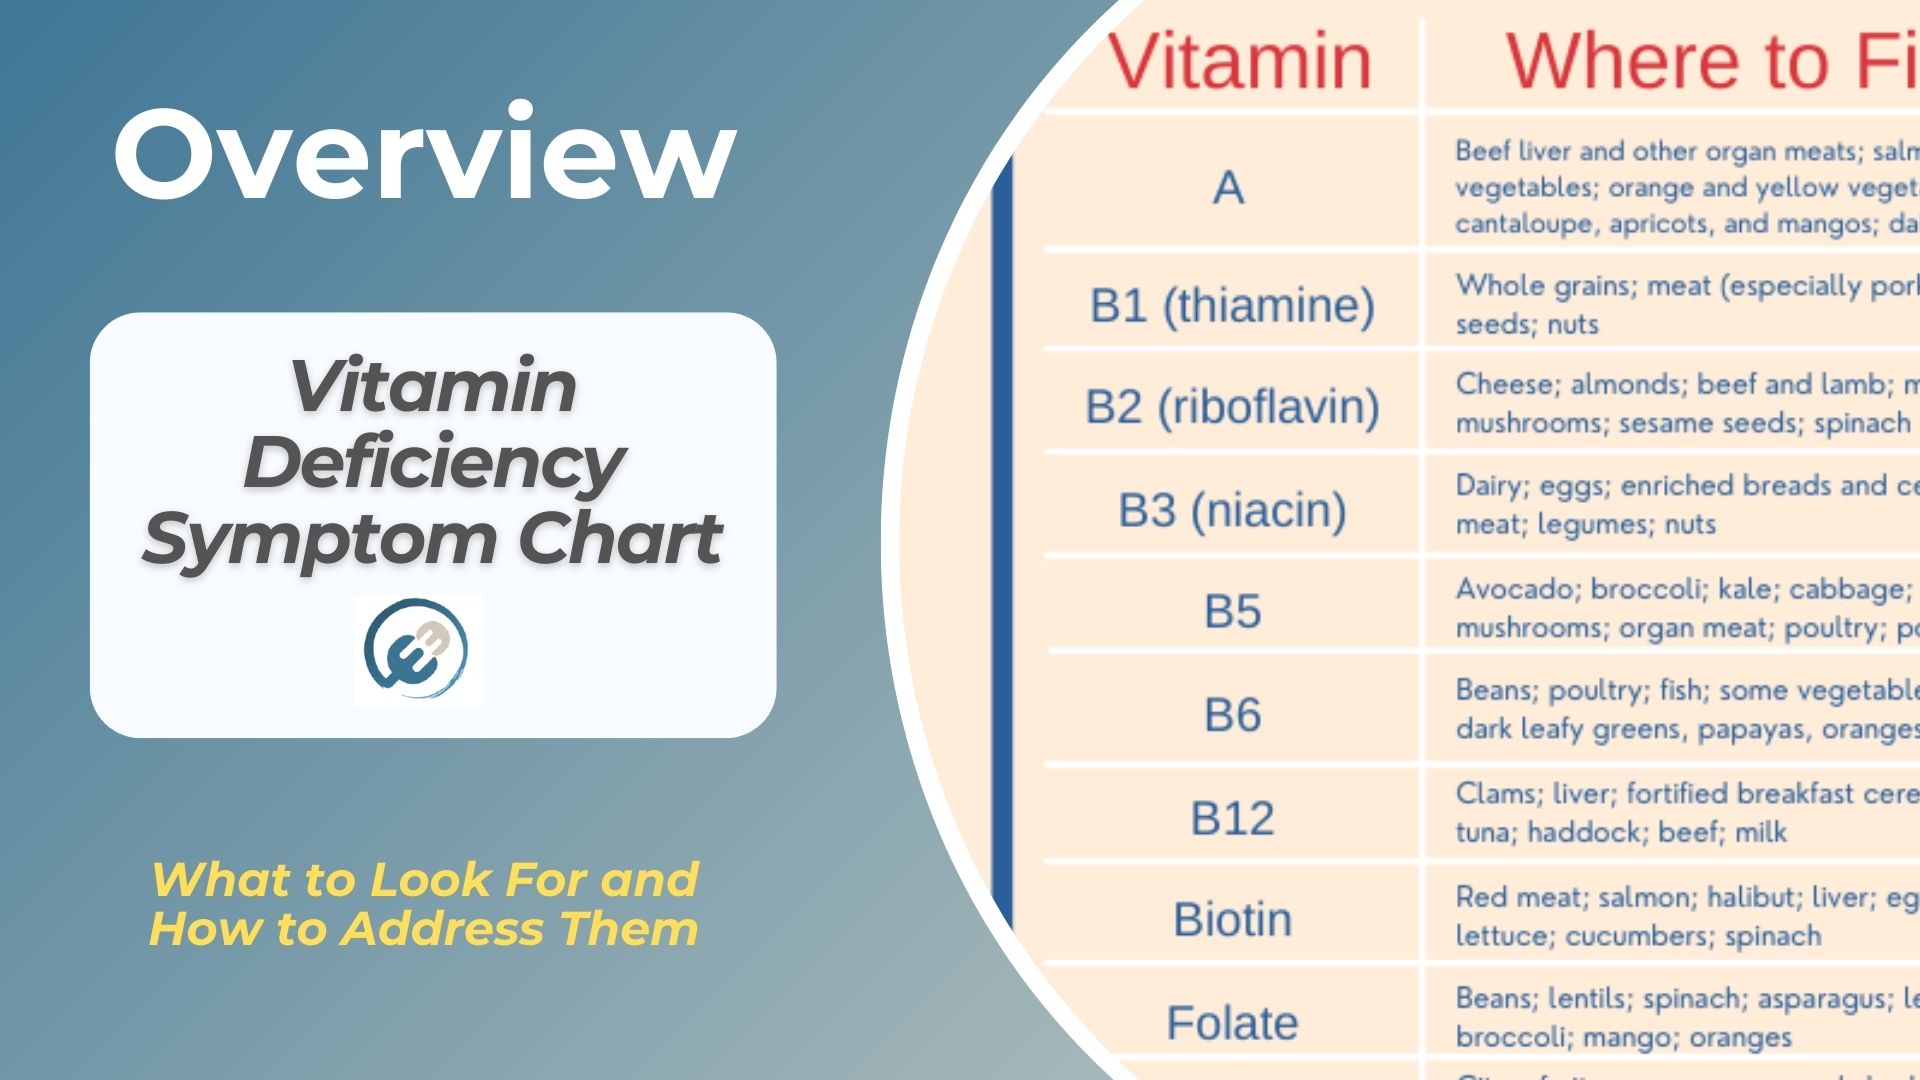 Vitamin Deficiency Symptom Chart What to Look For and How to Address Them